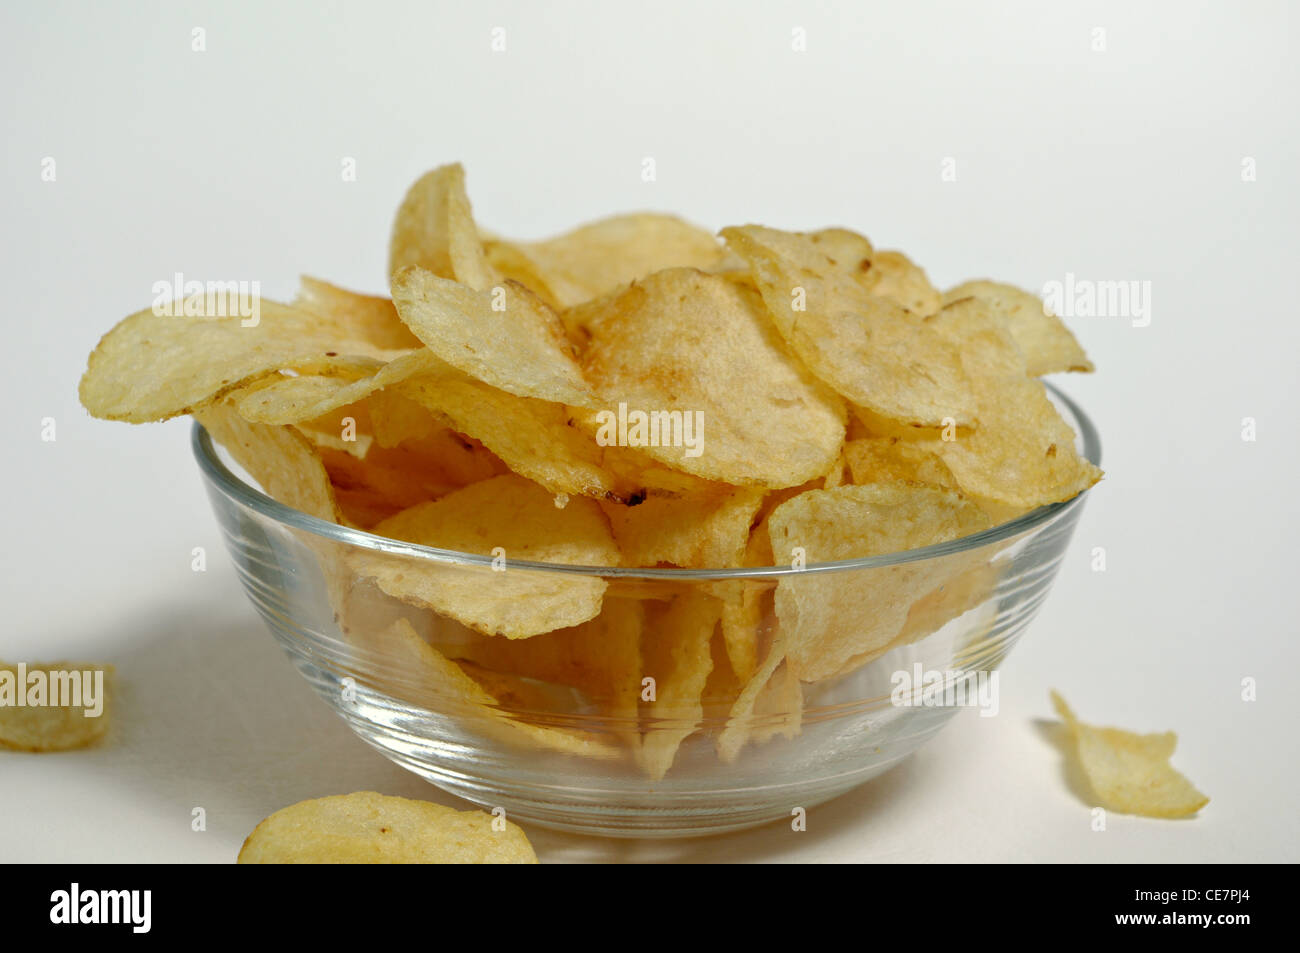 Potato chips sit in a glass bowl on a plain white background. Stock Photo